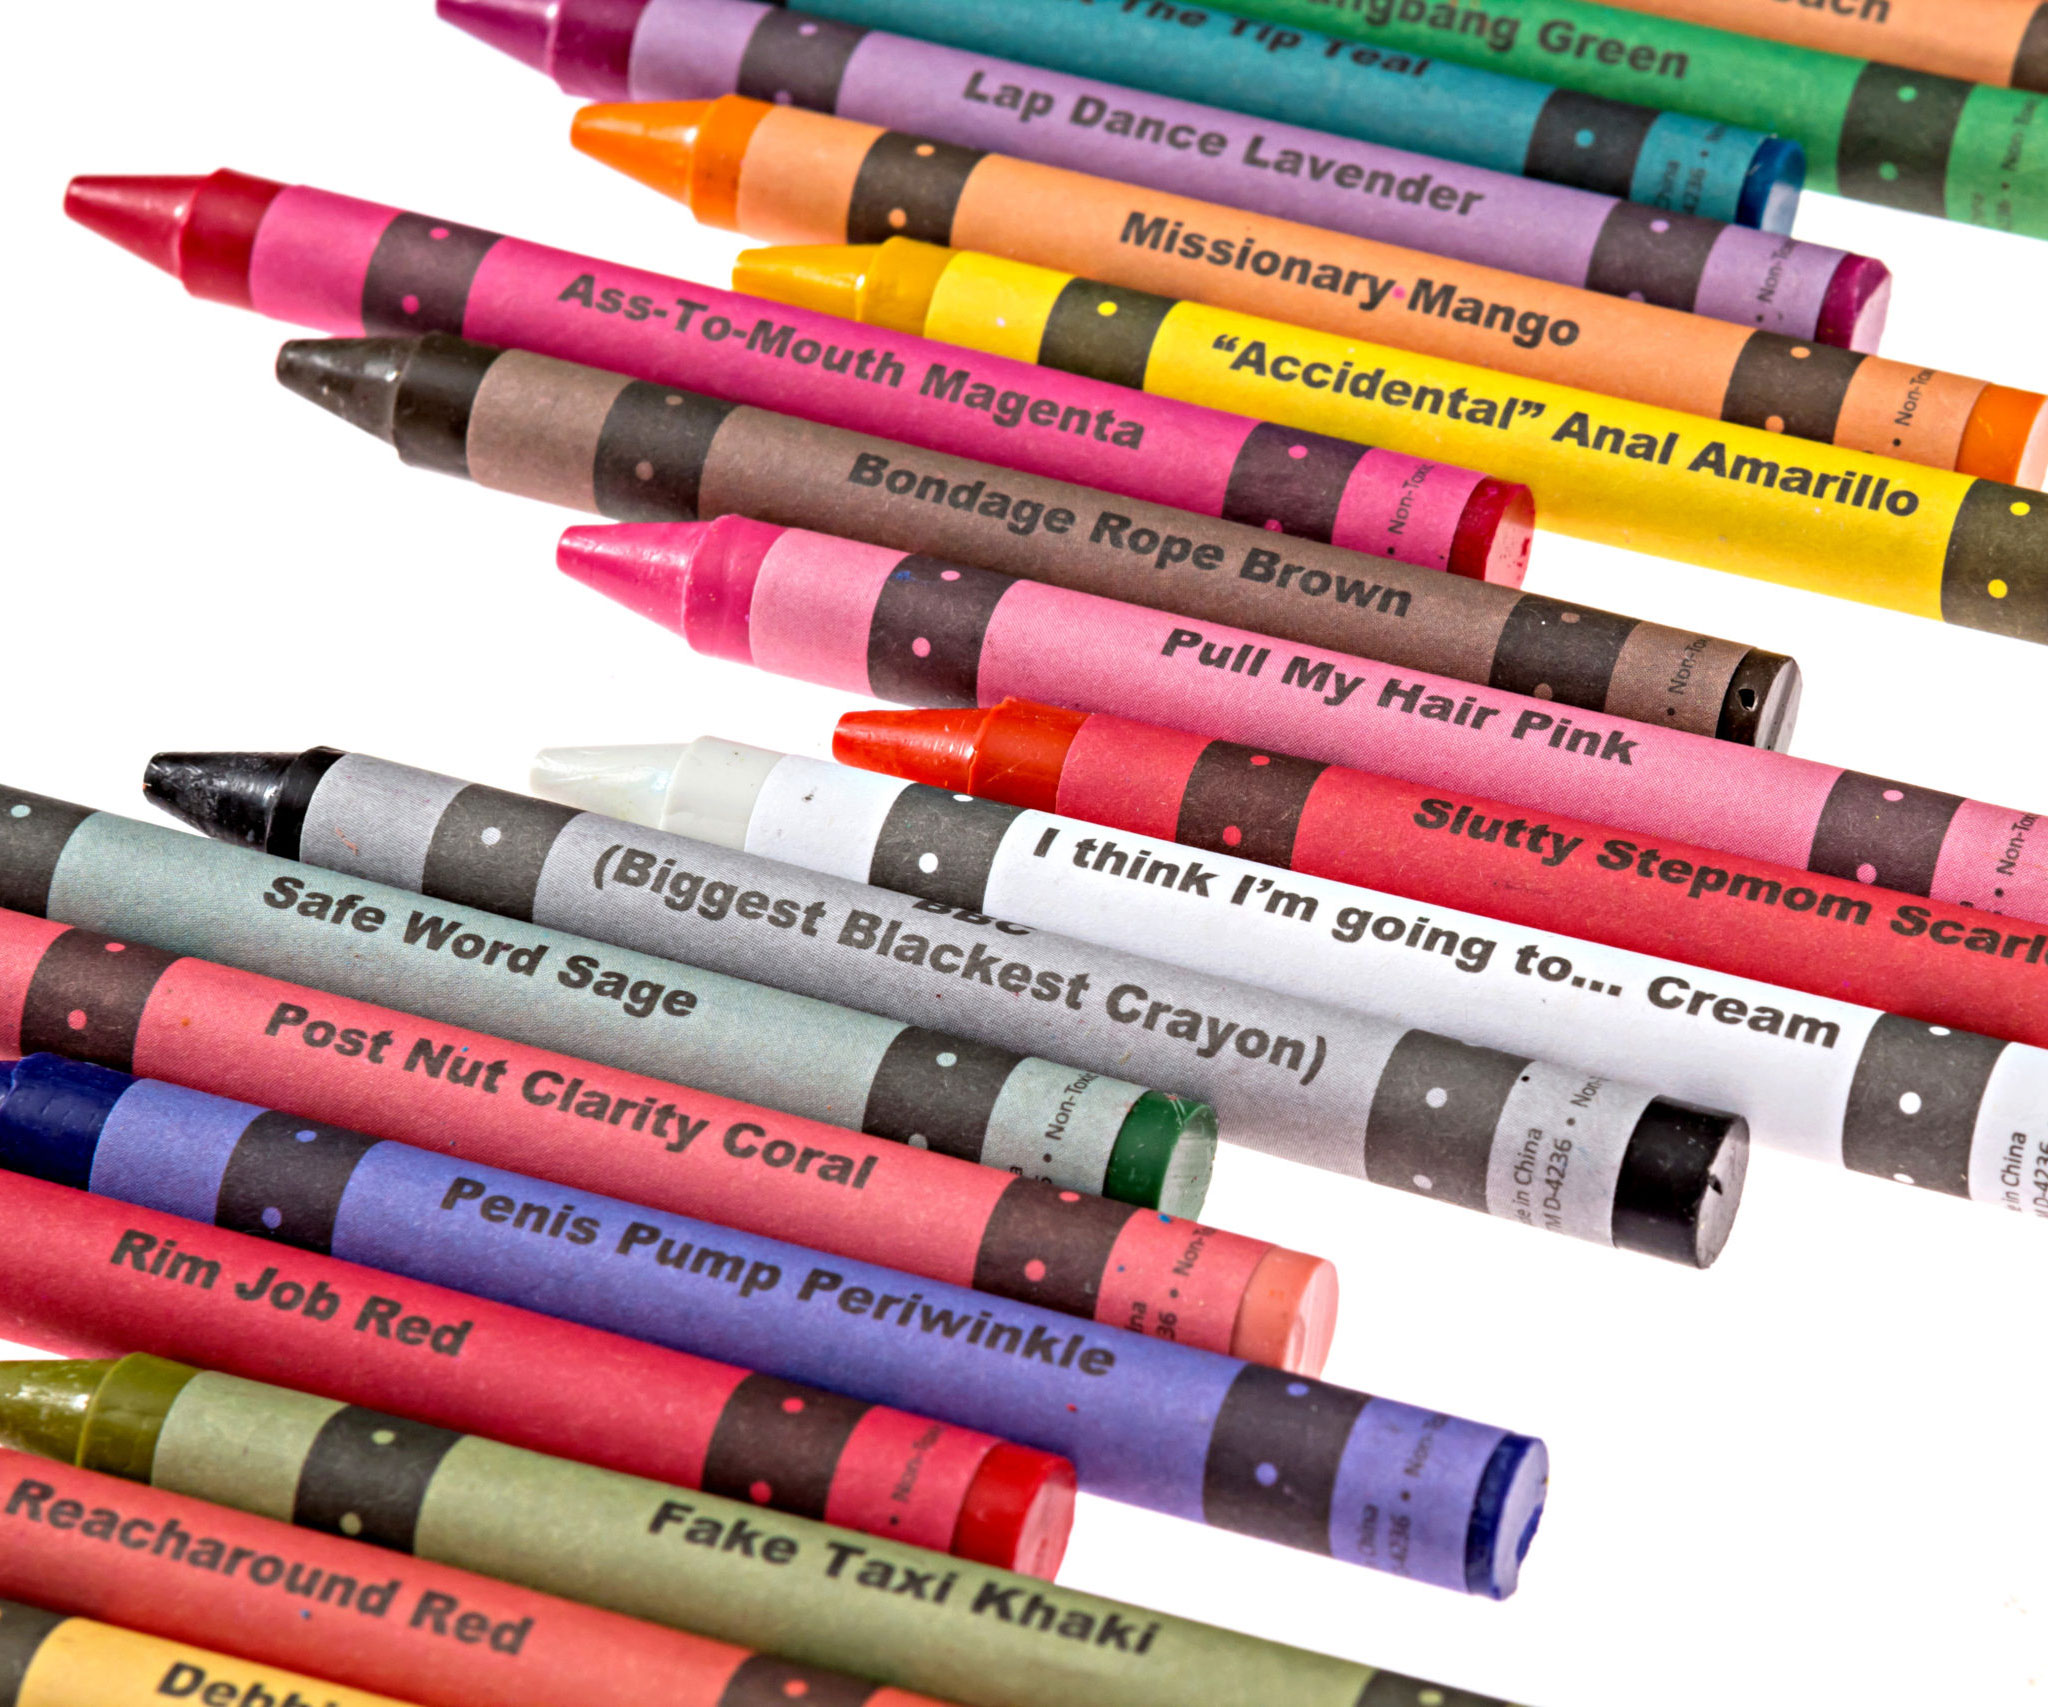 Offensive Crayons Porn Pack Edition